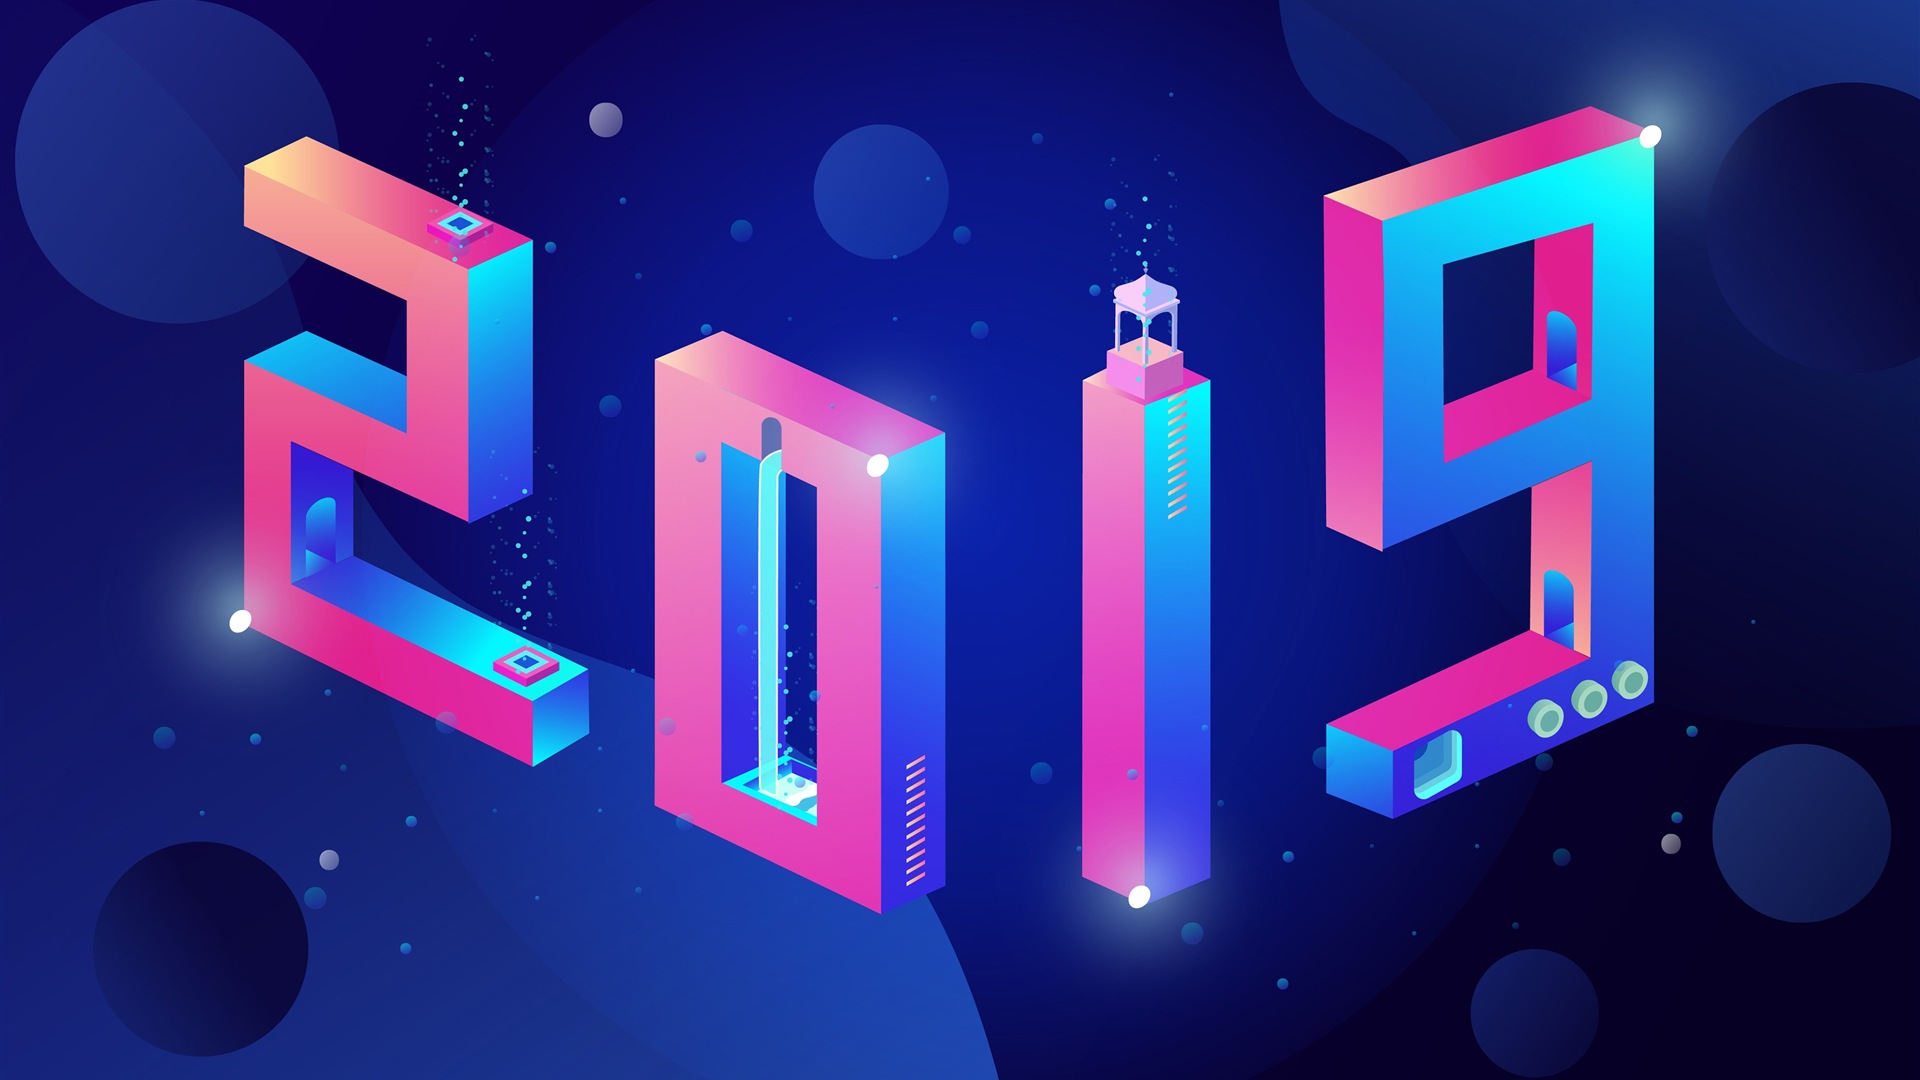 Happy New Year 2019 HD wallpapers #1 - 1920x1080